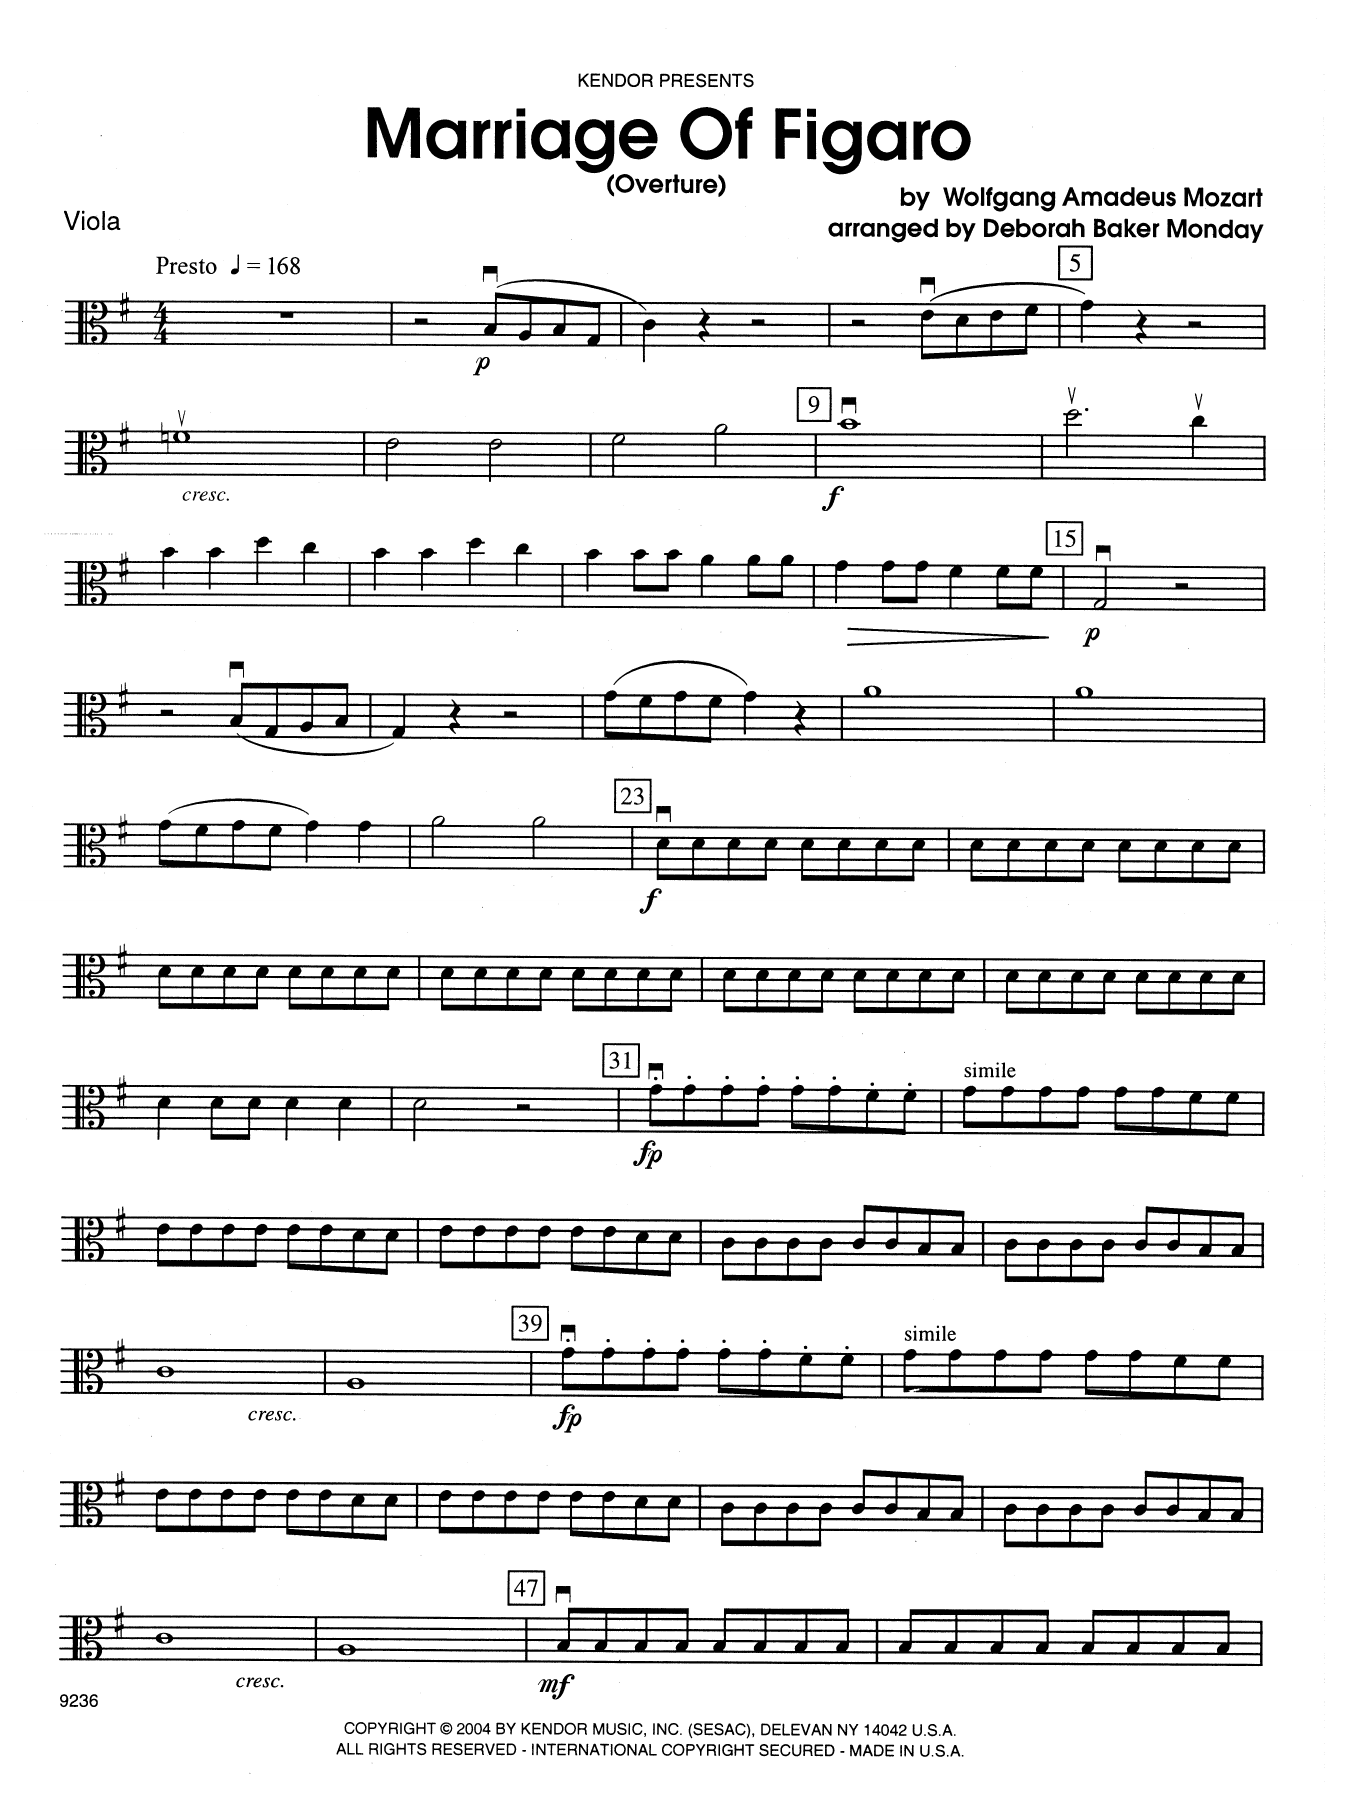 Marriage Of Figaro (Overture) - Viola sheet music